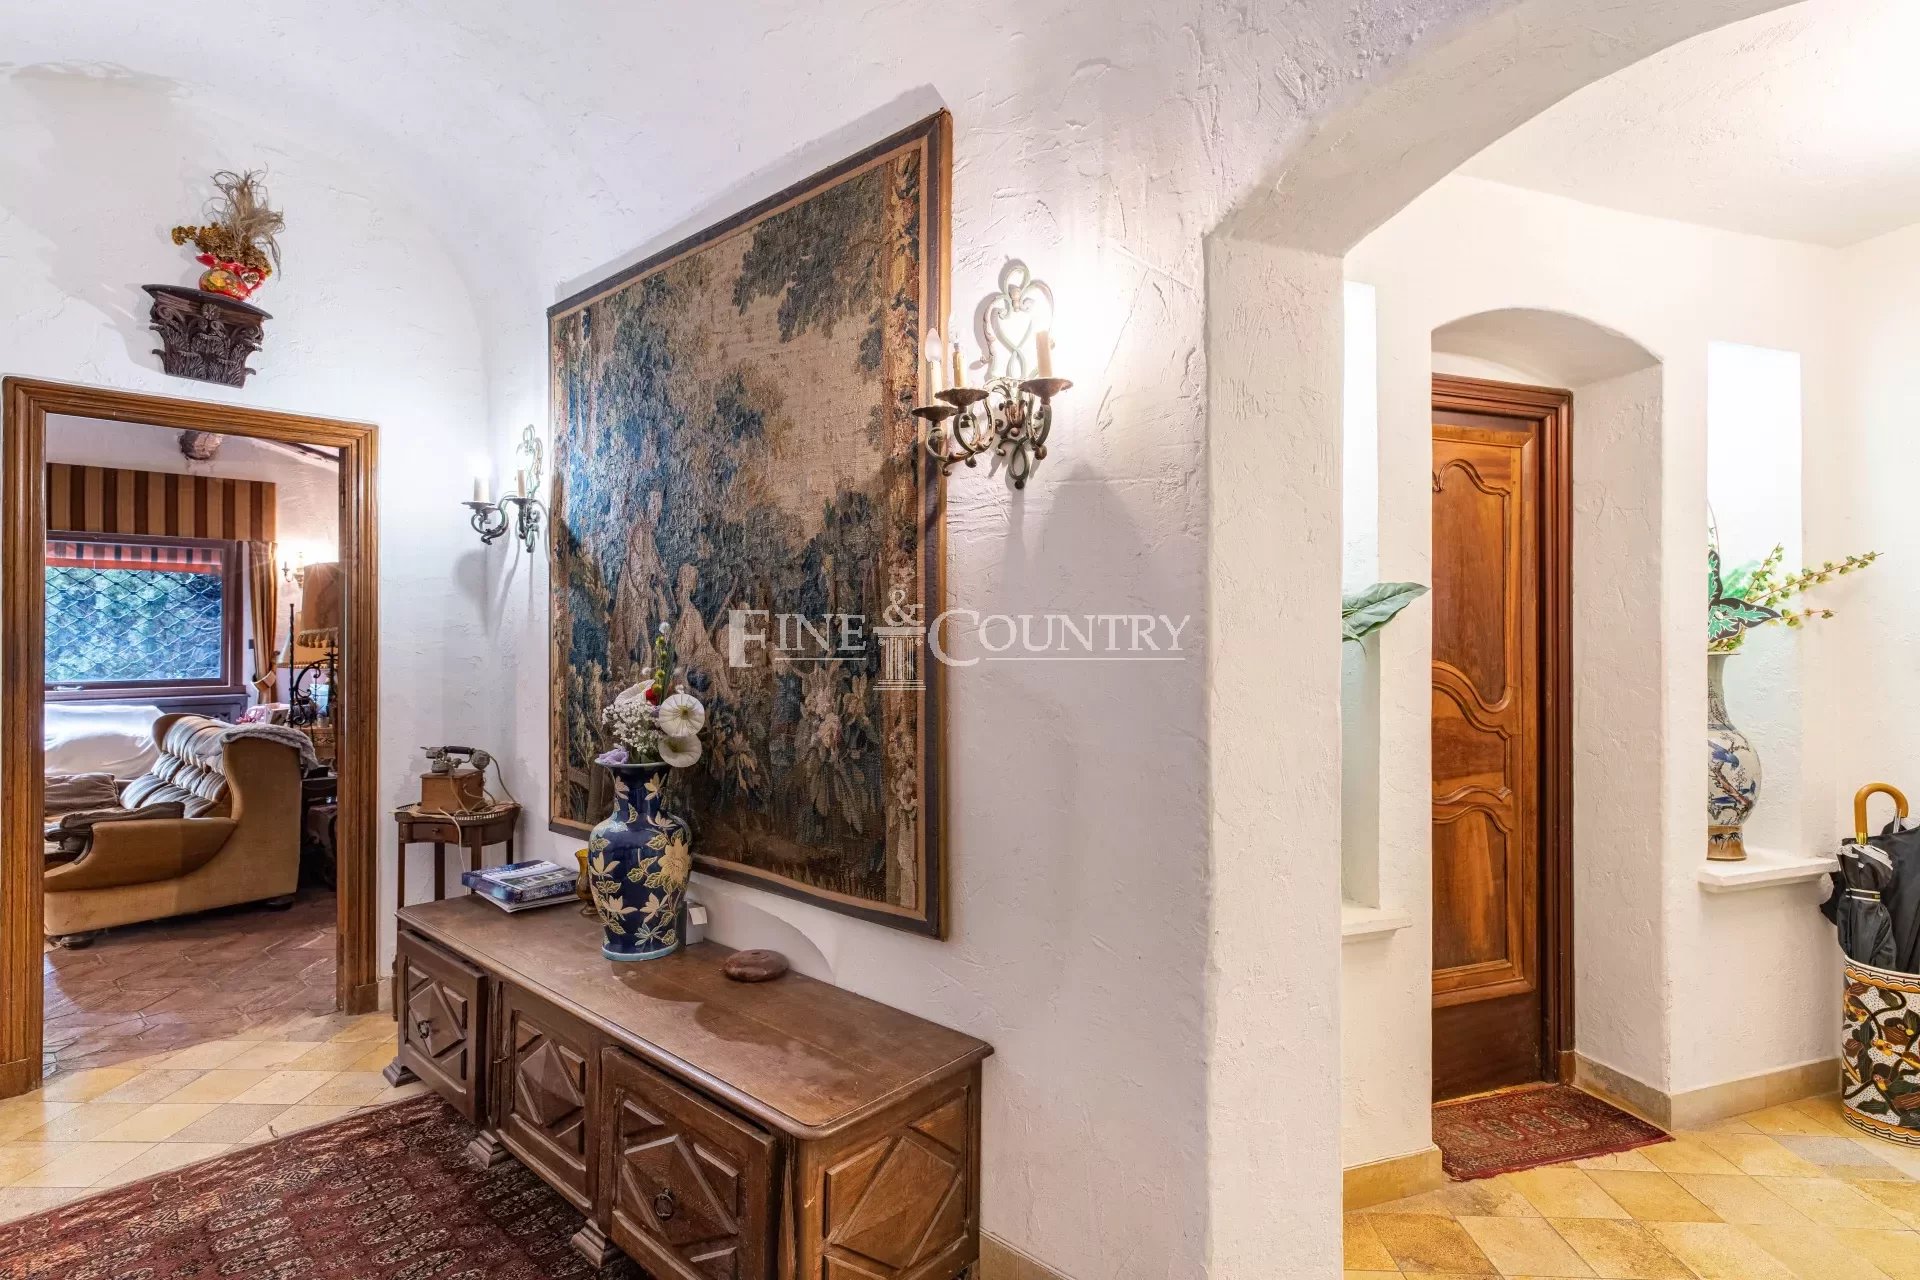 Photo of Villa for sale in Mougins in private domain to renovate